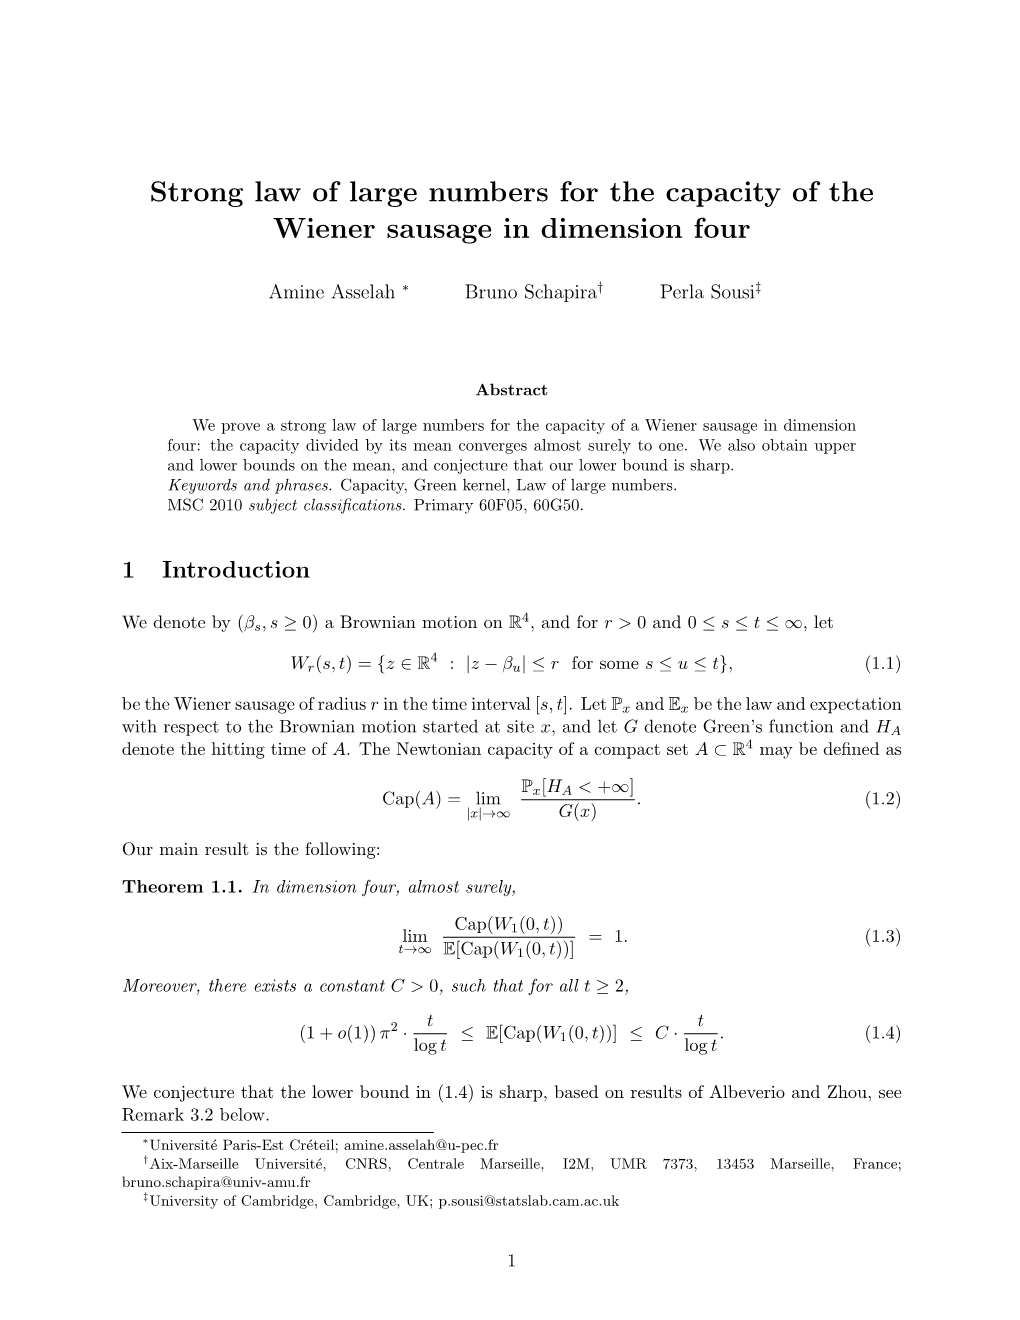 Strong Law of Large Numbers for the Capacity of the Wiener Sausage in Dimension Four